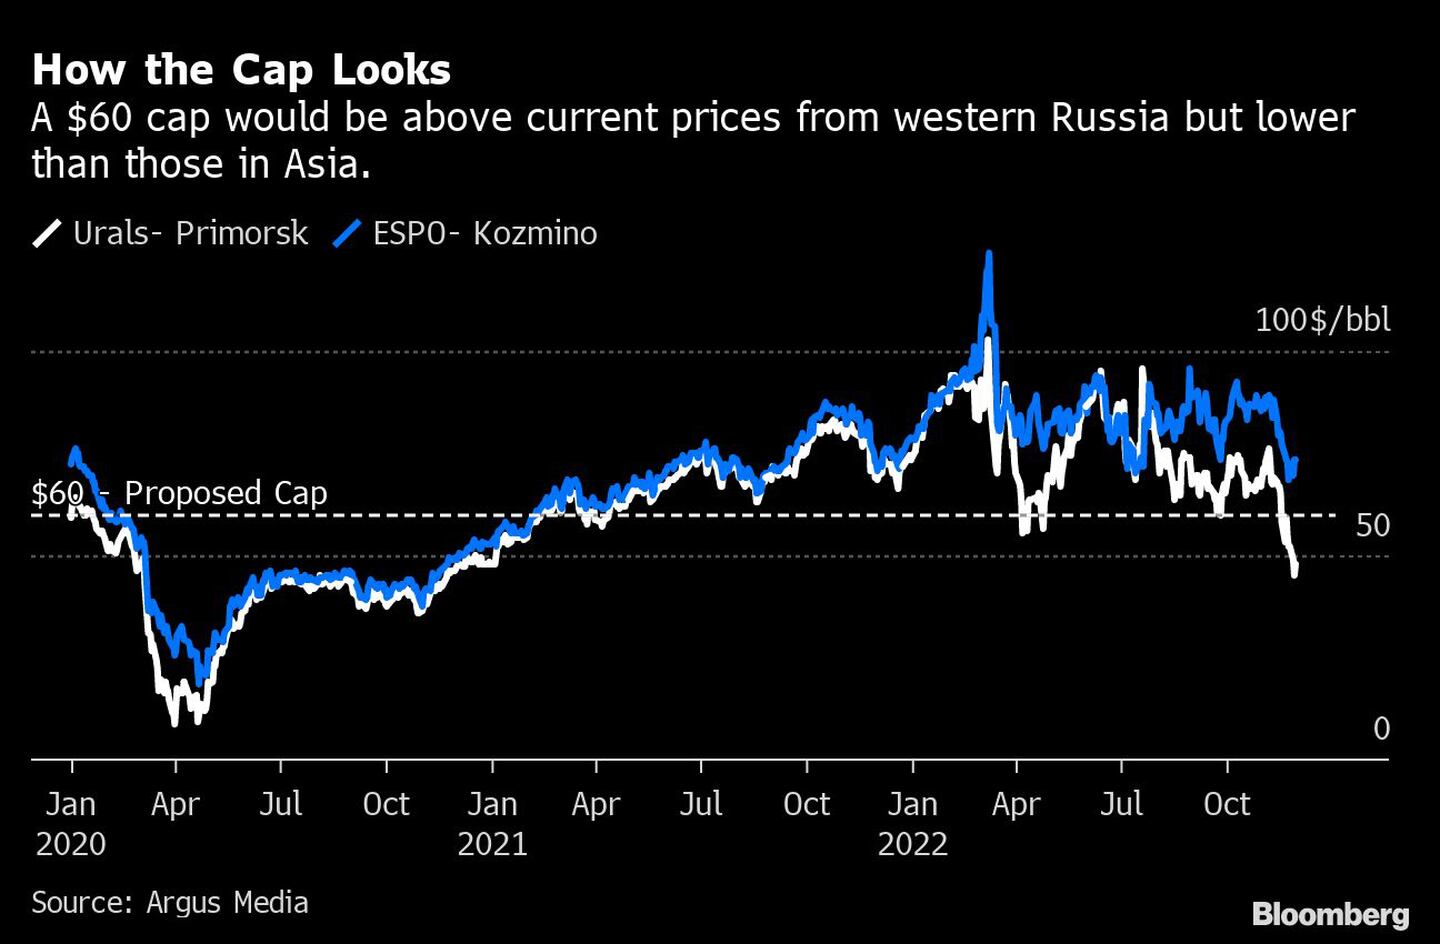 How the Cap Looks | A $60 cap would be above current prices from western Russia but lower than those in Asia.dfd